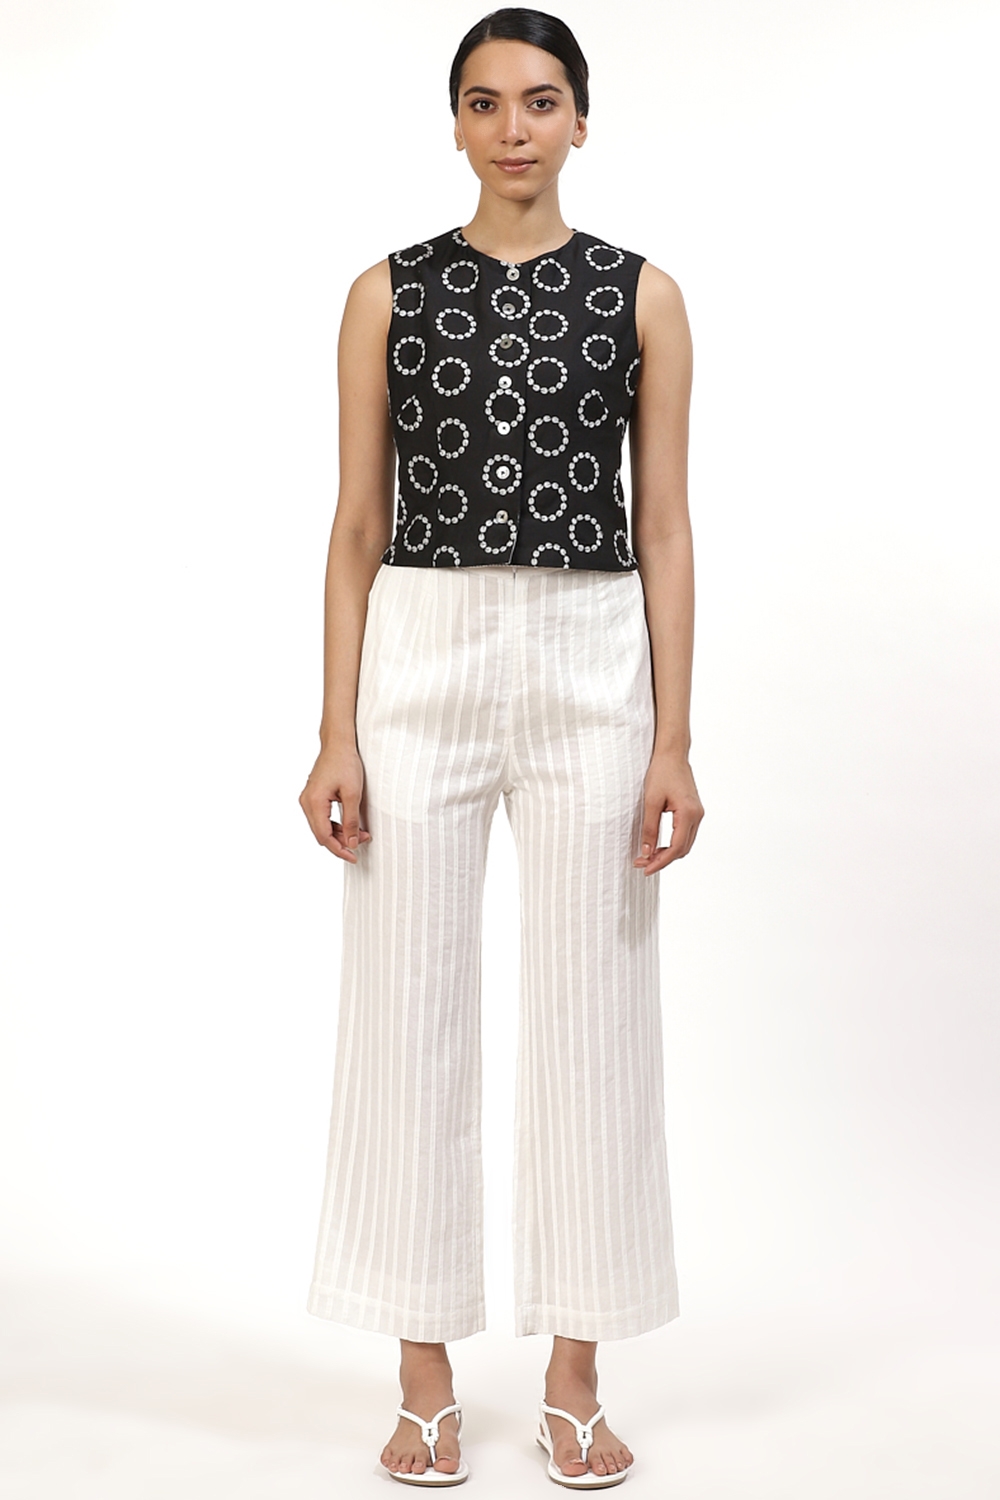 ABRAHAM AND THAKORE | Black And White Ring Blouse